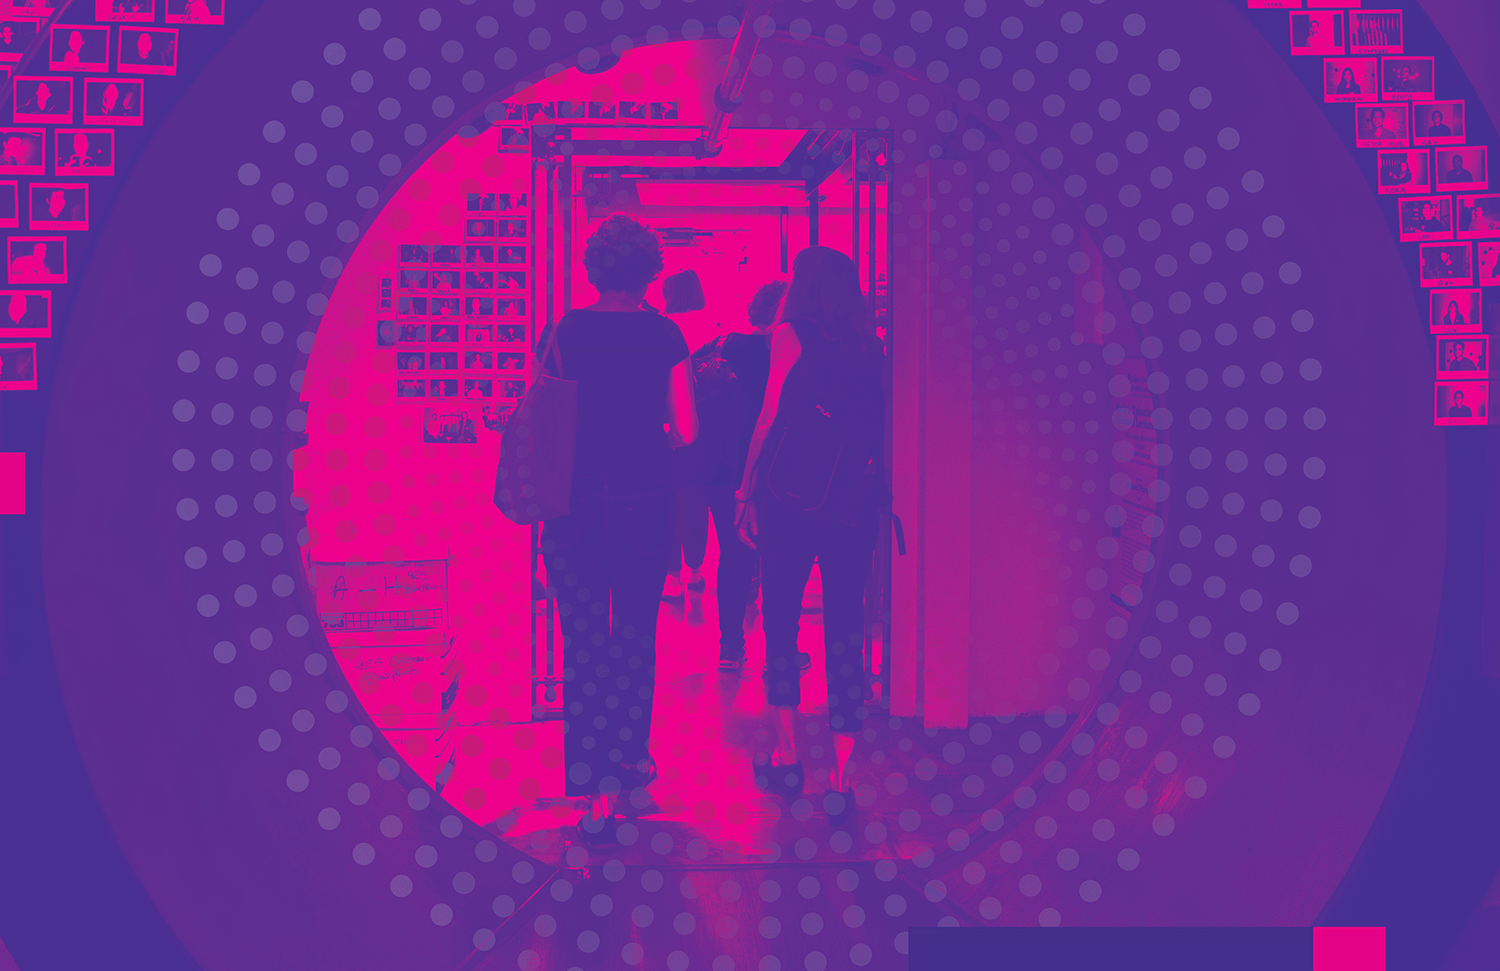 An abstract, layered image with circles emanating from the center. The image is saturated in purple and features figures walking away from view. Around them are polaroid-photo like textures.